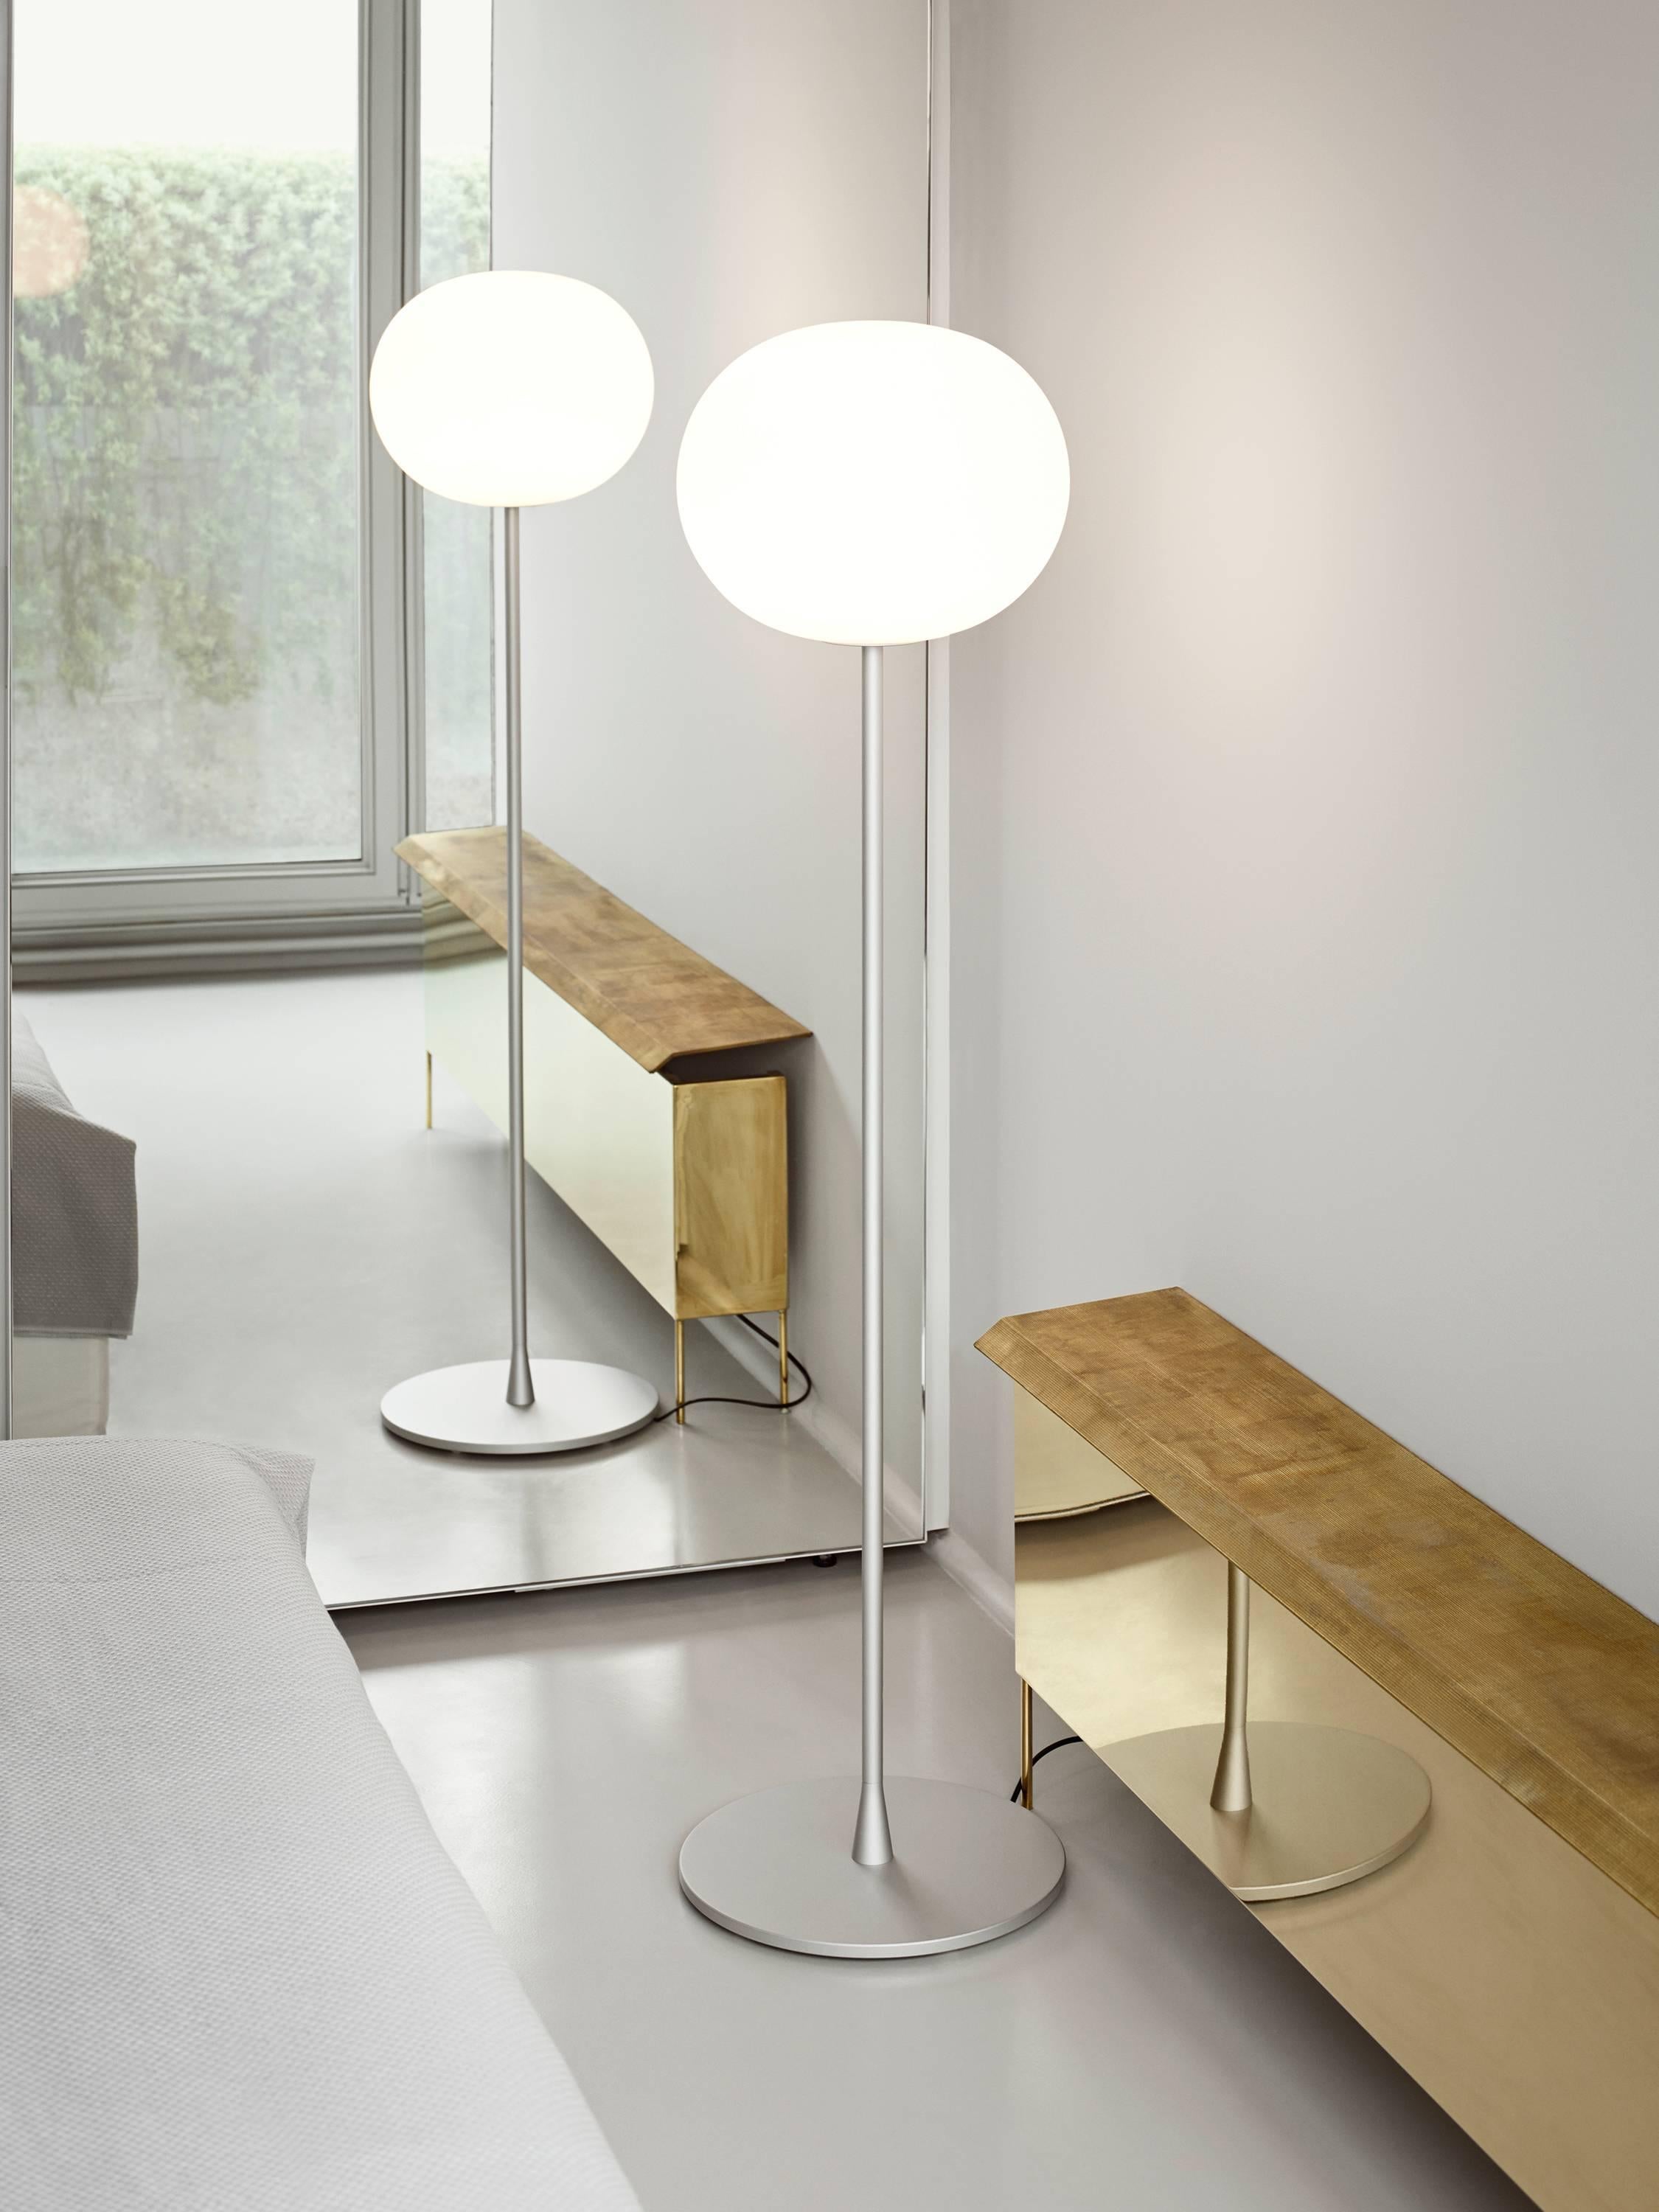 FLOS Glo-Ball F1 Halogen Floor Lamp by Jasper Morrison
Part of the popular Glo Ball series, the Glo Ball-F was created in 1998 by artist Jasper Morrison to invoke the radiant calm of a full moon. This contemporary floor lamp fits naturally into any